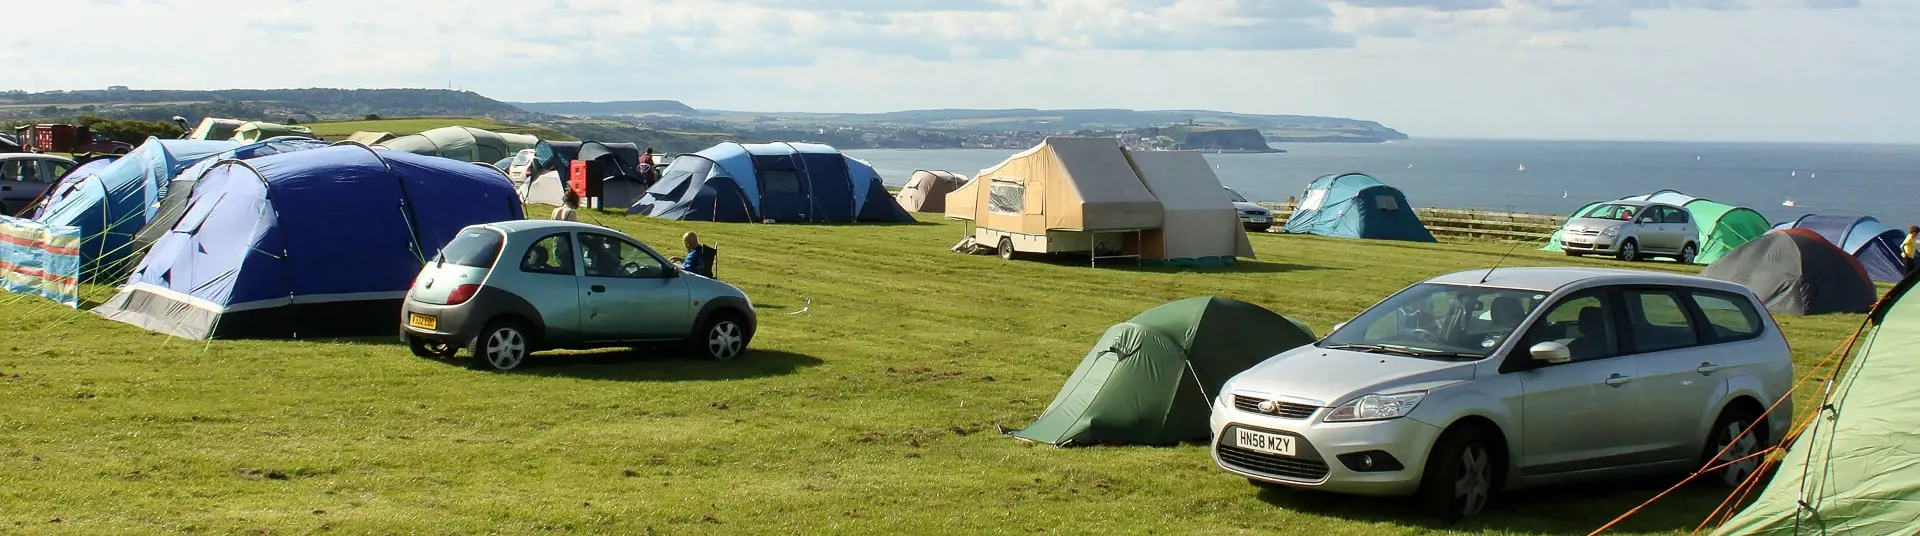 Caravan and Camping Holidays across Yorkshire